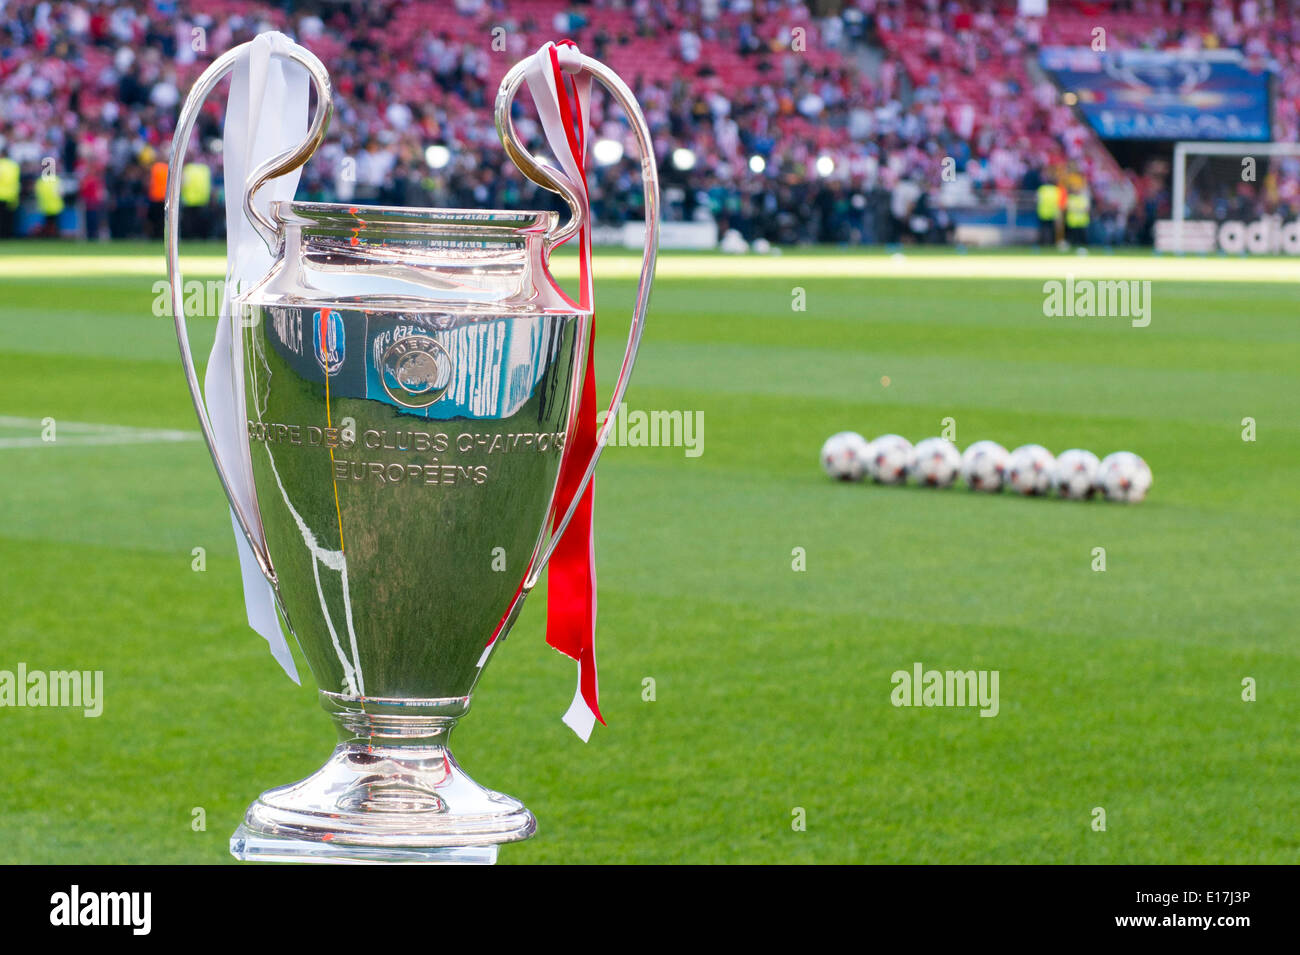 Lisbon, Portugal. 24th May, 2014. The Champions League Trophy  Football/Soccer : UEFA Champions League final match between Real Madrid 4-1  Atletico de Madrid at Luz stadium in Lisbon, Portugal . © Maurizio